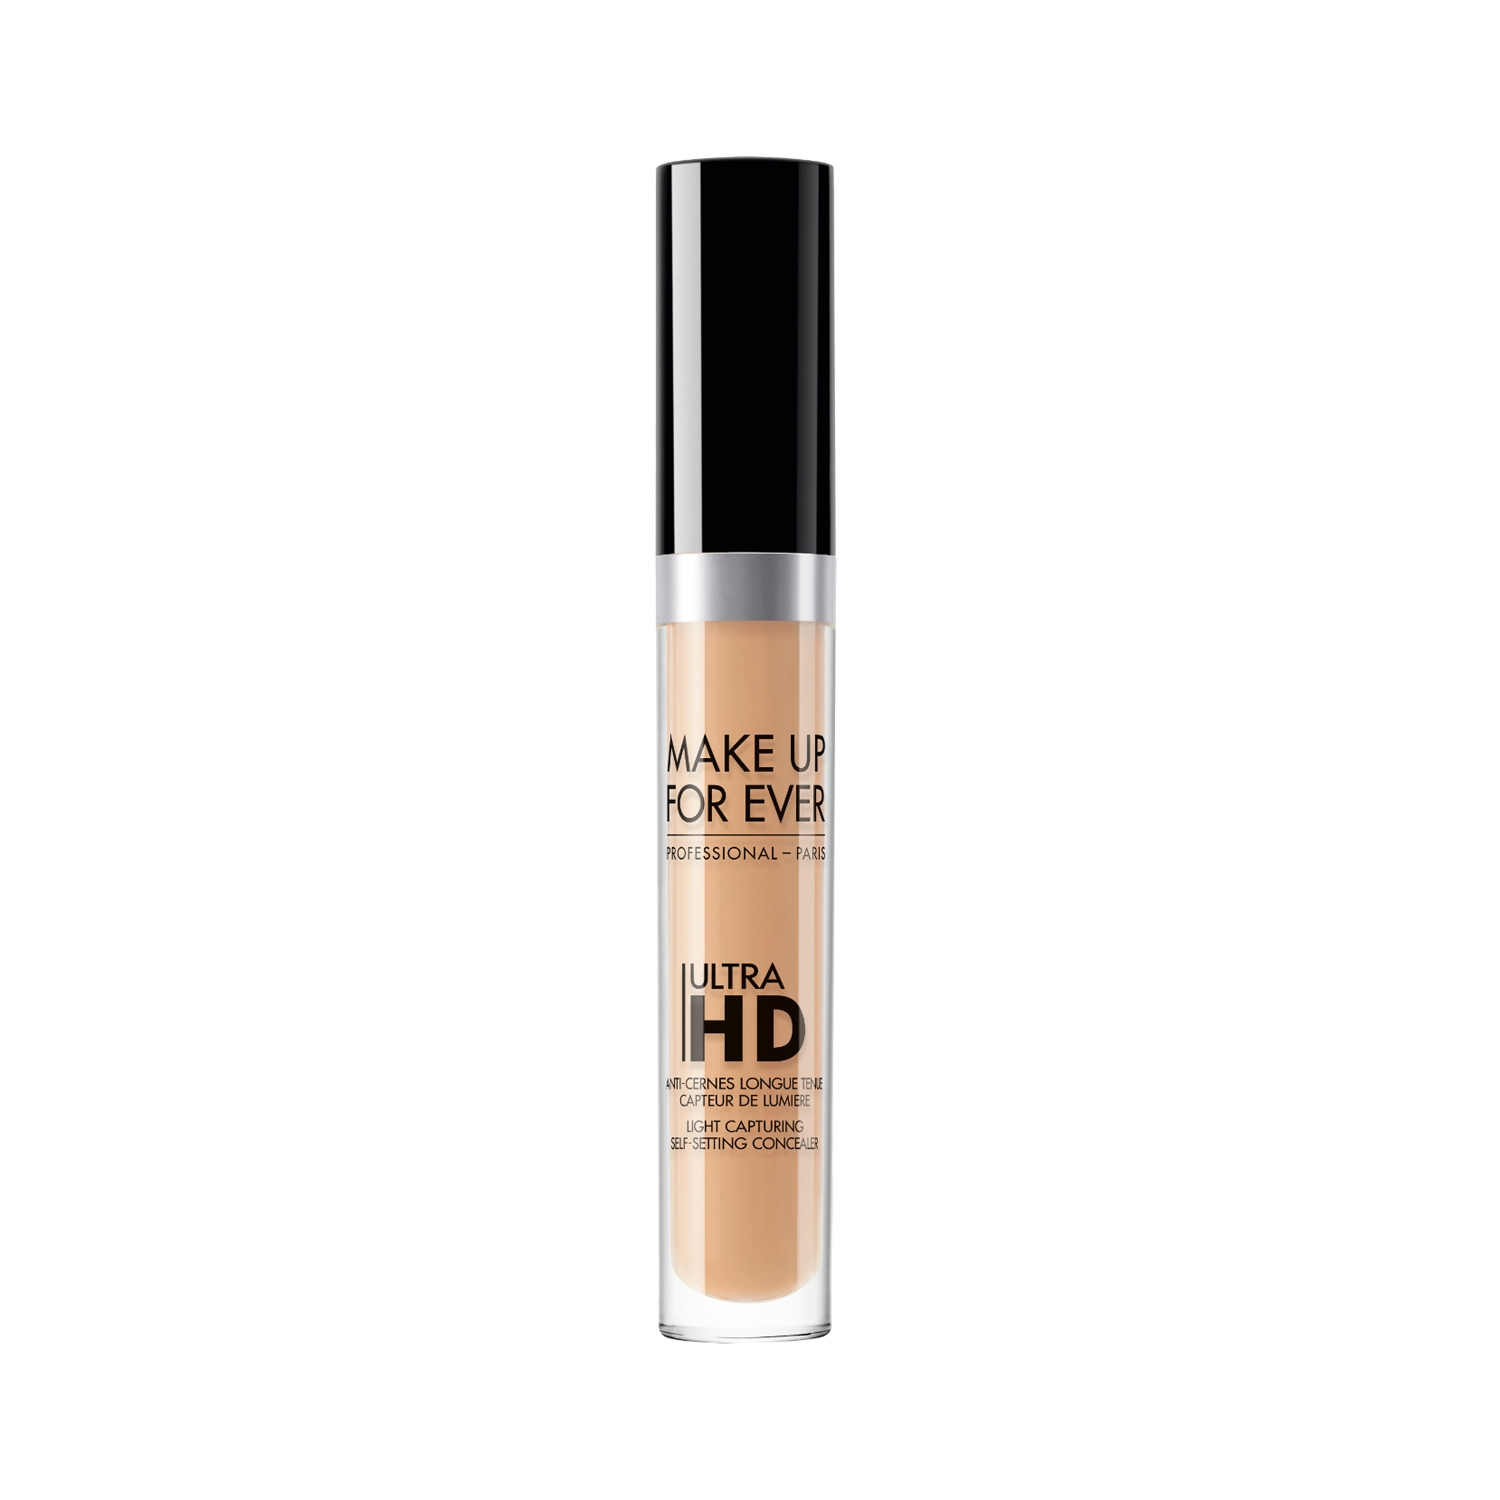 Make Up For Ever | Make Up For Ever Ultra HD Concealer Invisible Cover Concealer - 31 Macadamia (5ml)